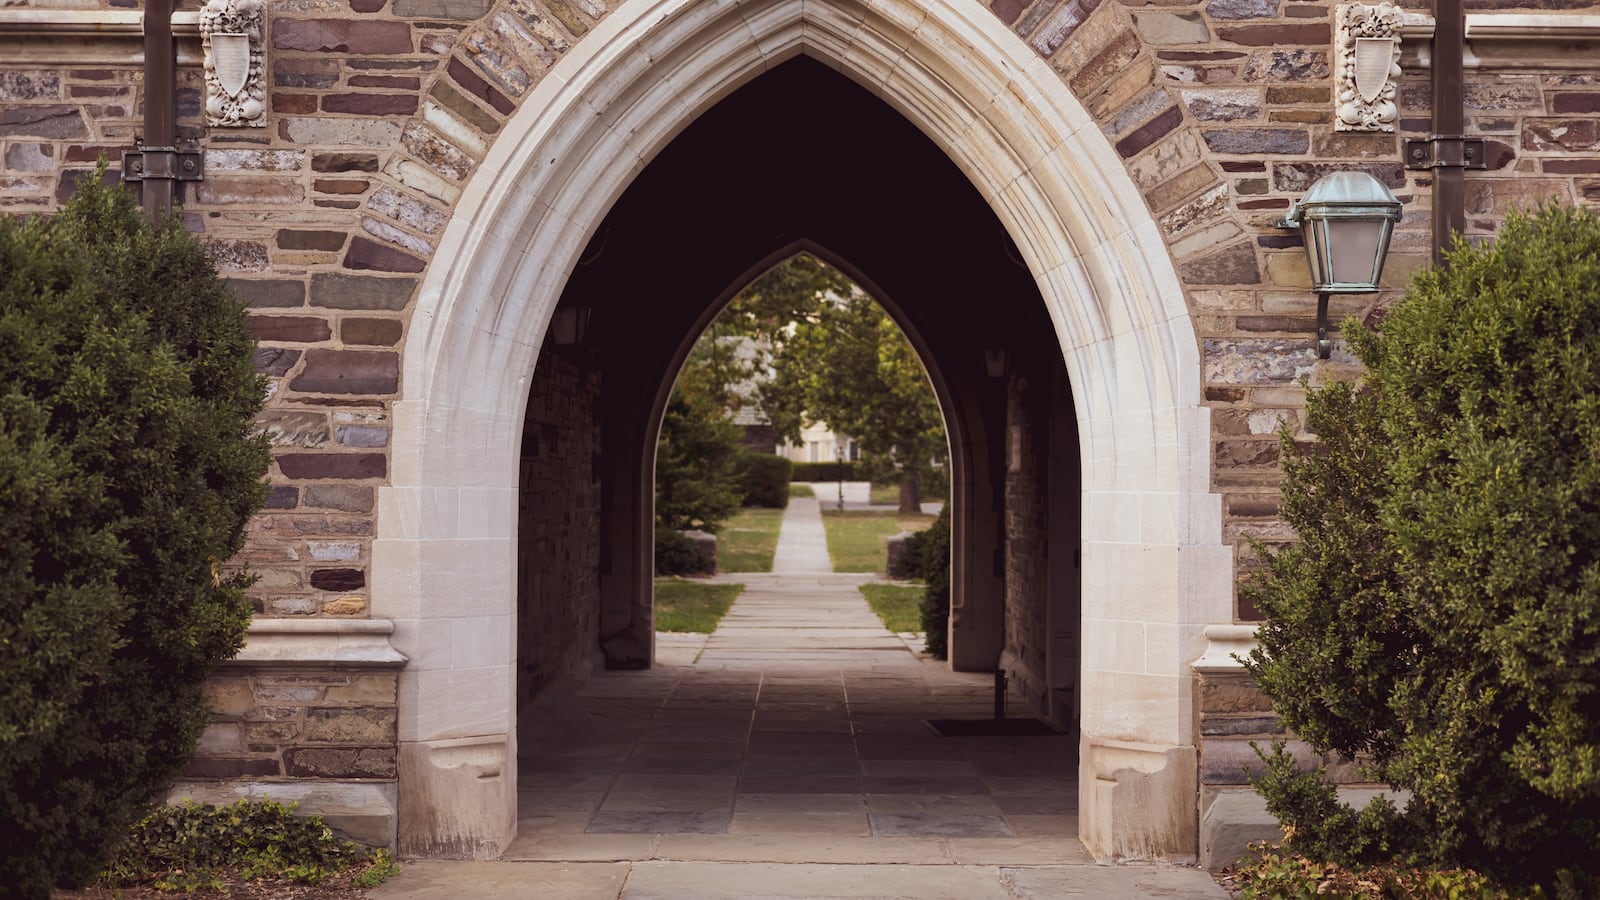 An stone archway tunnel passage on gothic-style college campus.